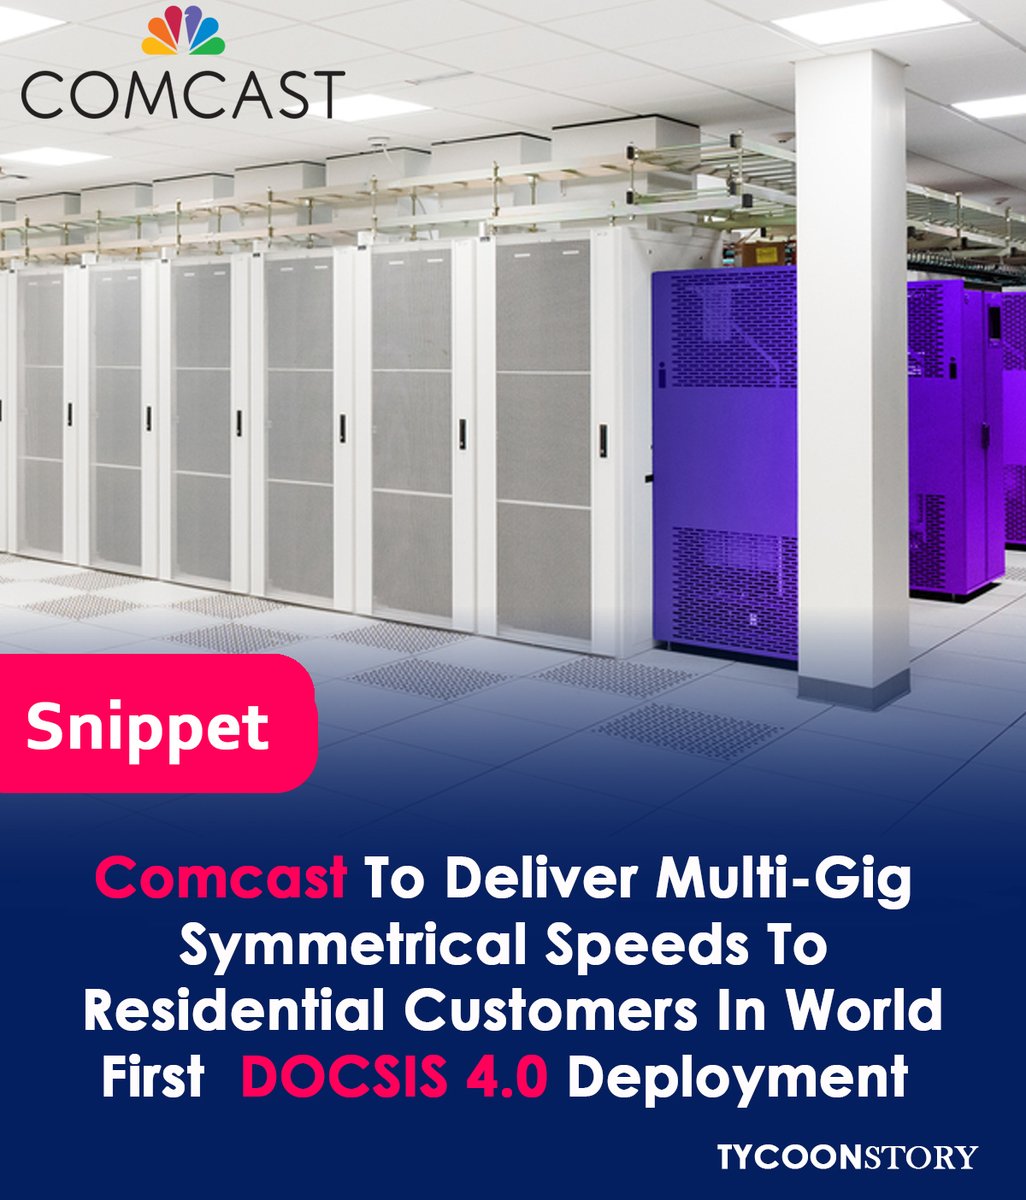 Comcast Will Offer Multi-gig Symmetrical Speeds During The World's First Deployment Of Docsis 4.0.
#Comcast #DOCSIS4 #MultiGigSpeeds #WorldFirst #InternetSpeed #Broadband #Technology #Innovation #FutureOfInternet #GigabitInternet
#SymmetricalSpeeds @comcast